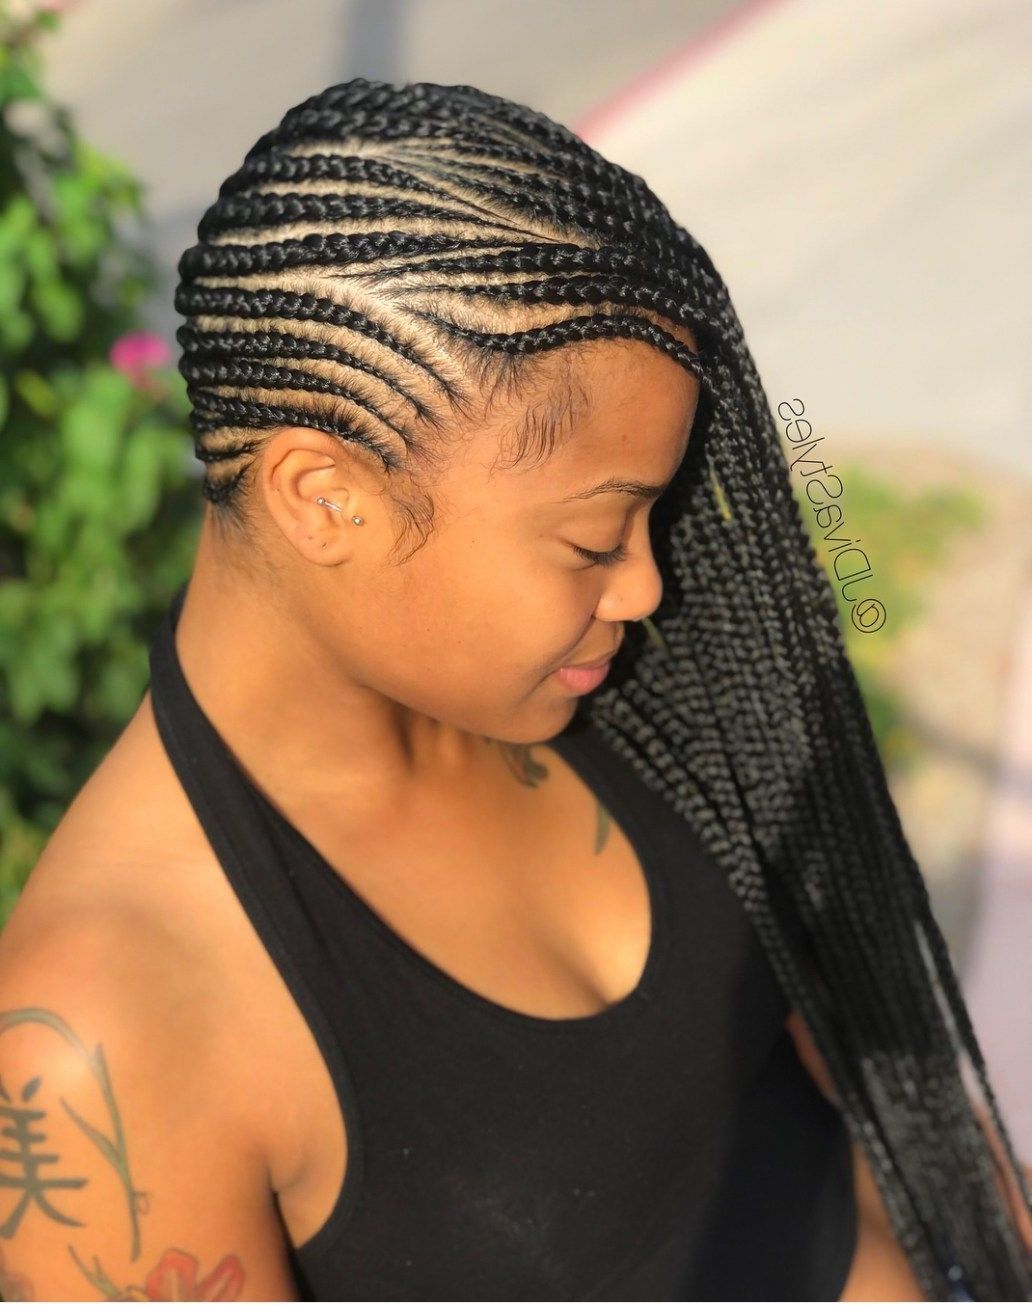 11 Cornrow Styles That Will Make You Want To Call Your Regarding Preferred Geometric Blonde Cornrows Braided Hairstyles (View 13 of 20)